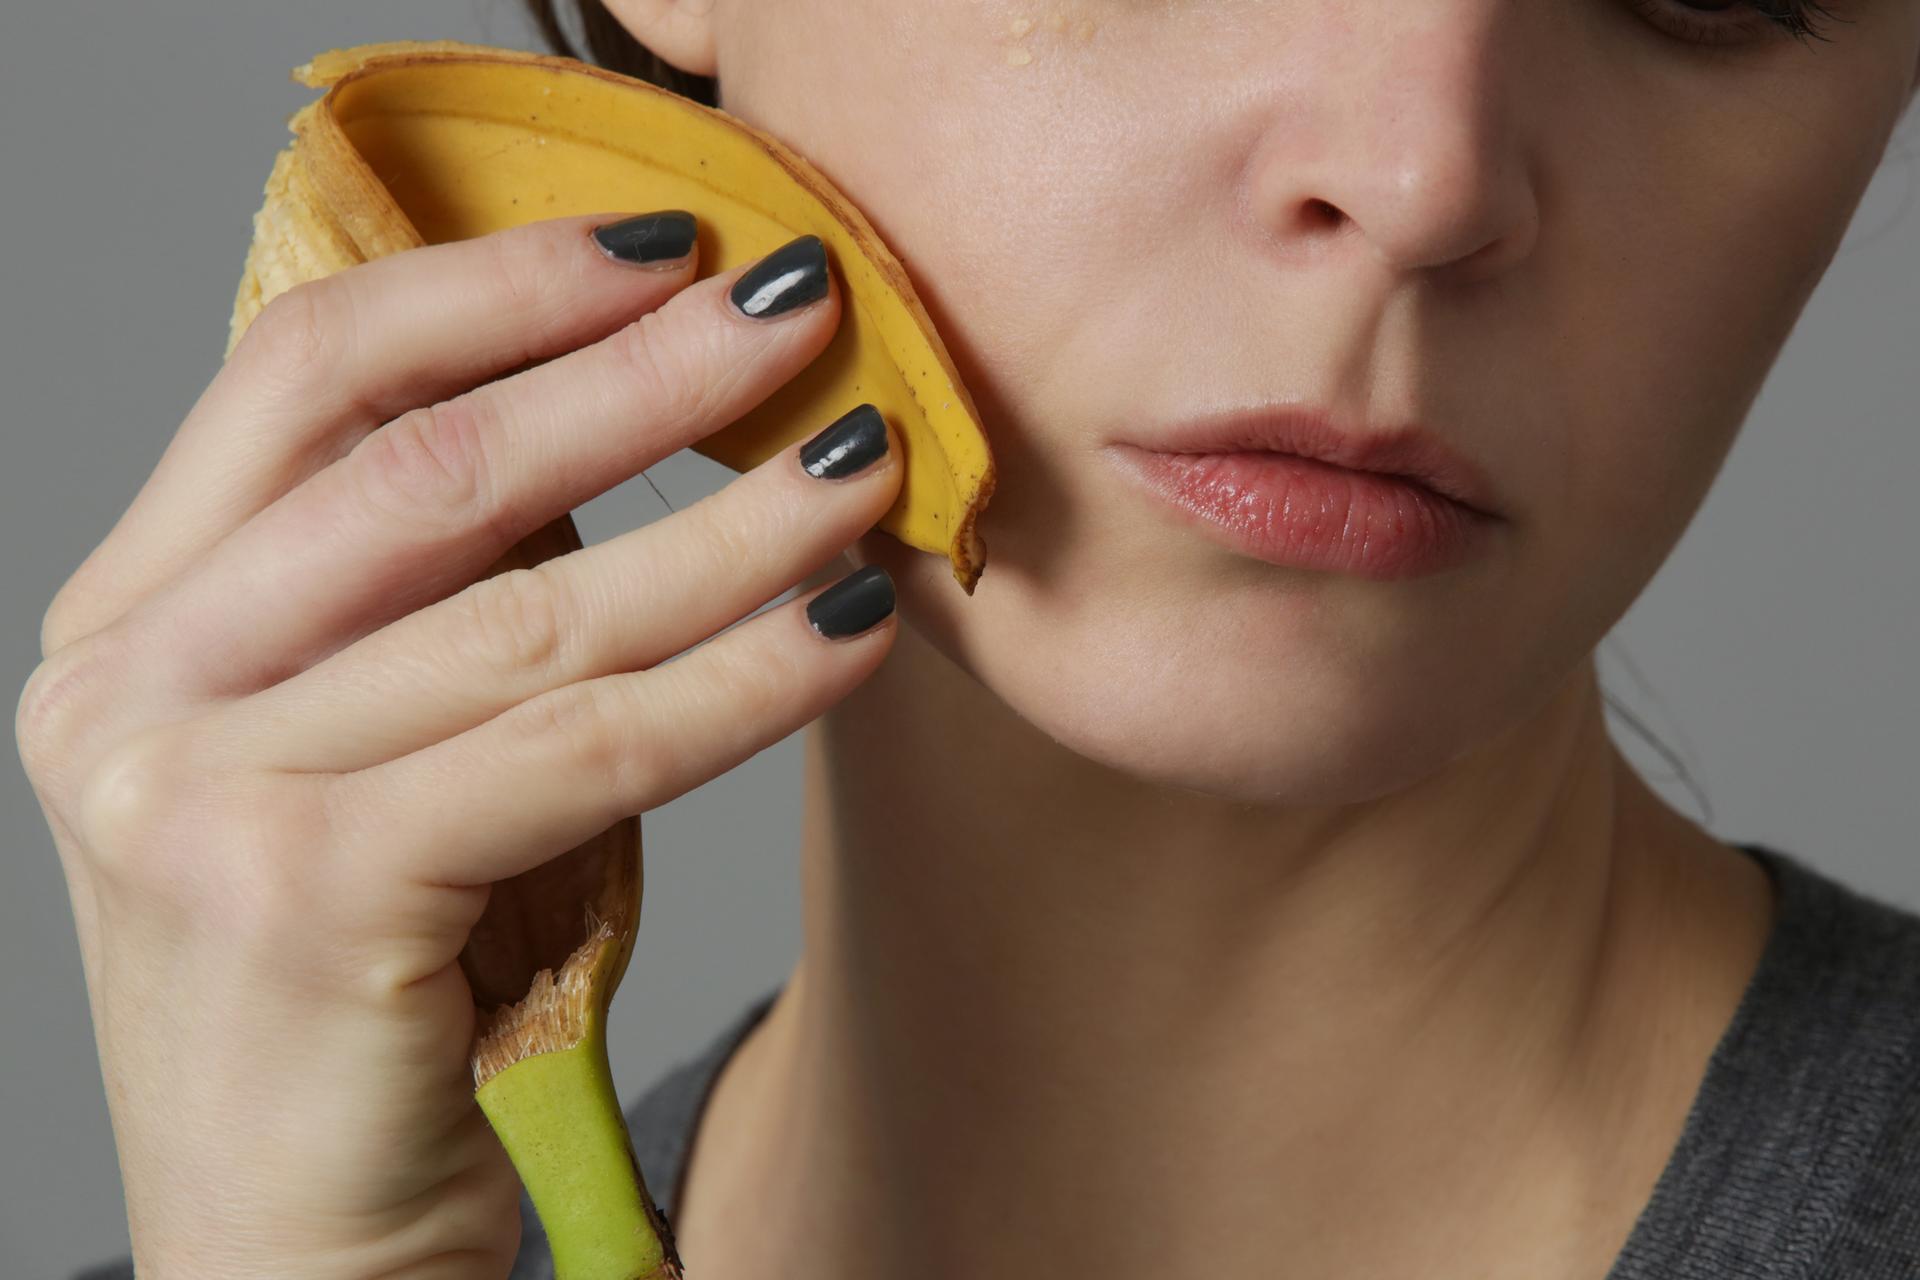 Don't throw away banana peels.  A dermatologist advises: they have a great effect on the skin